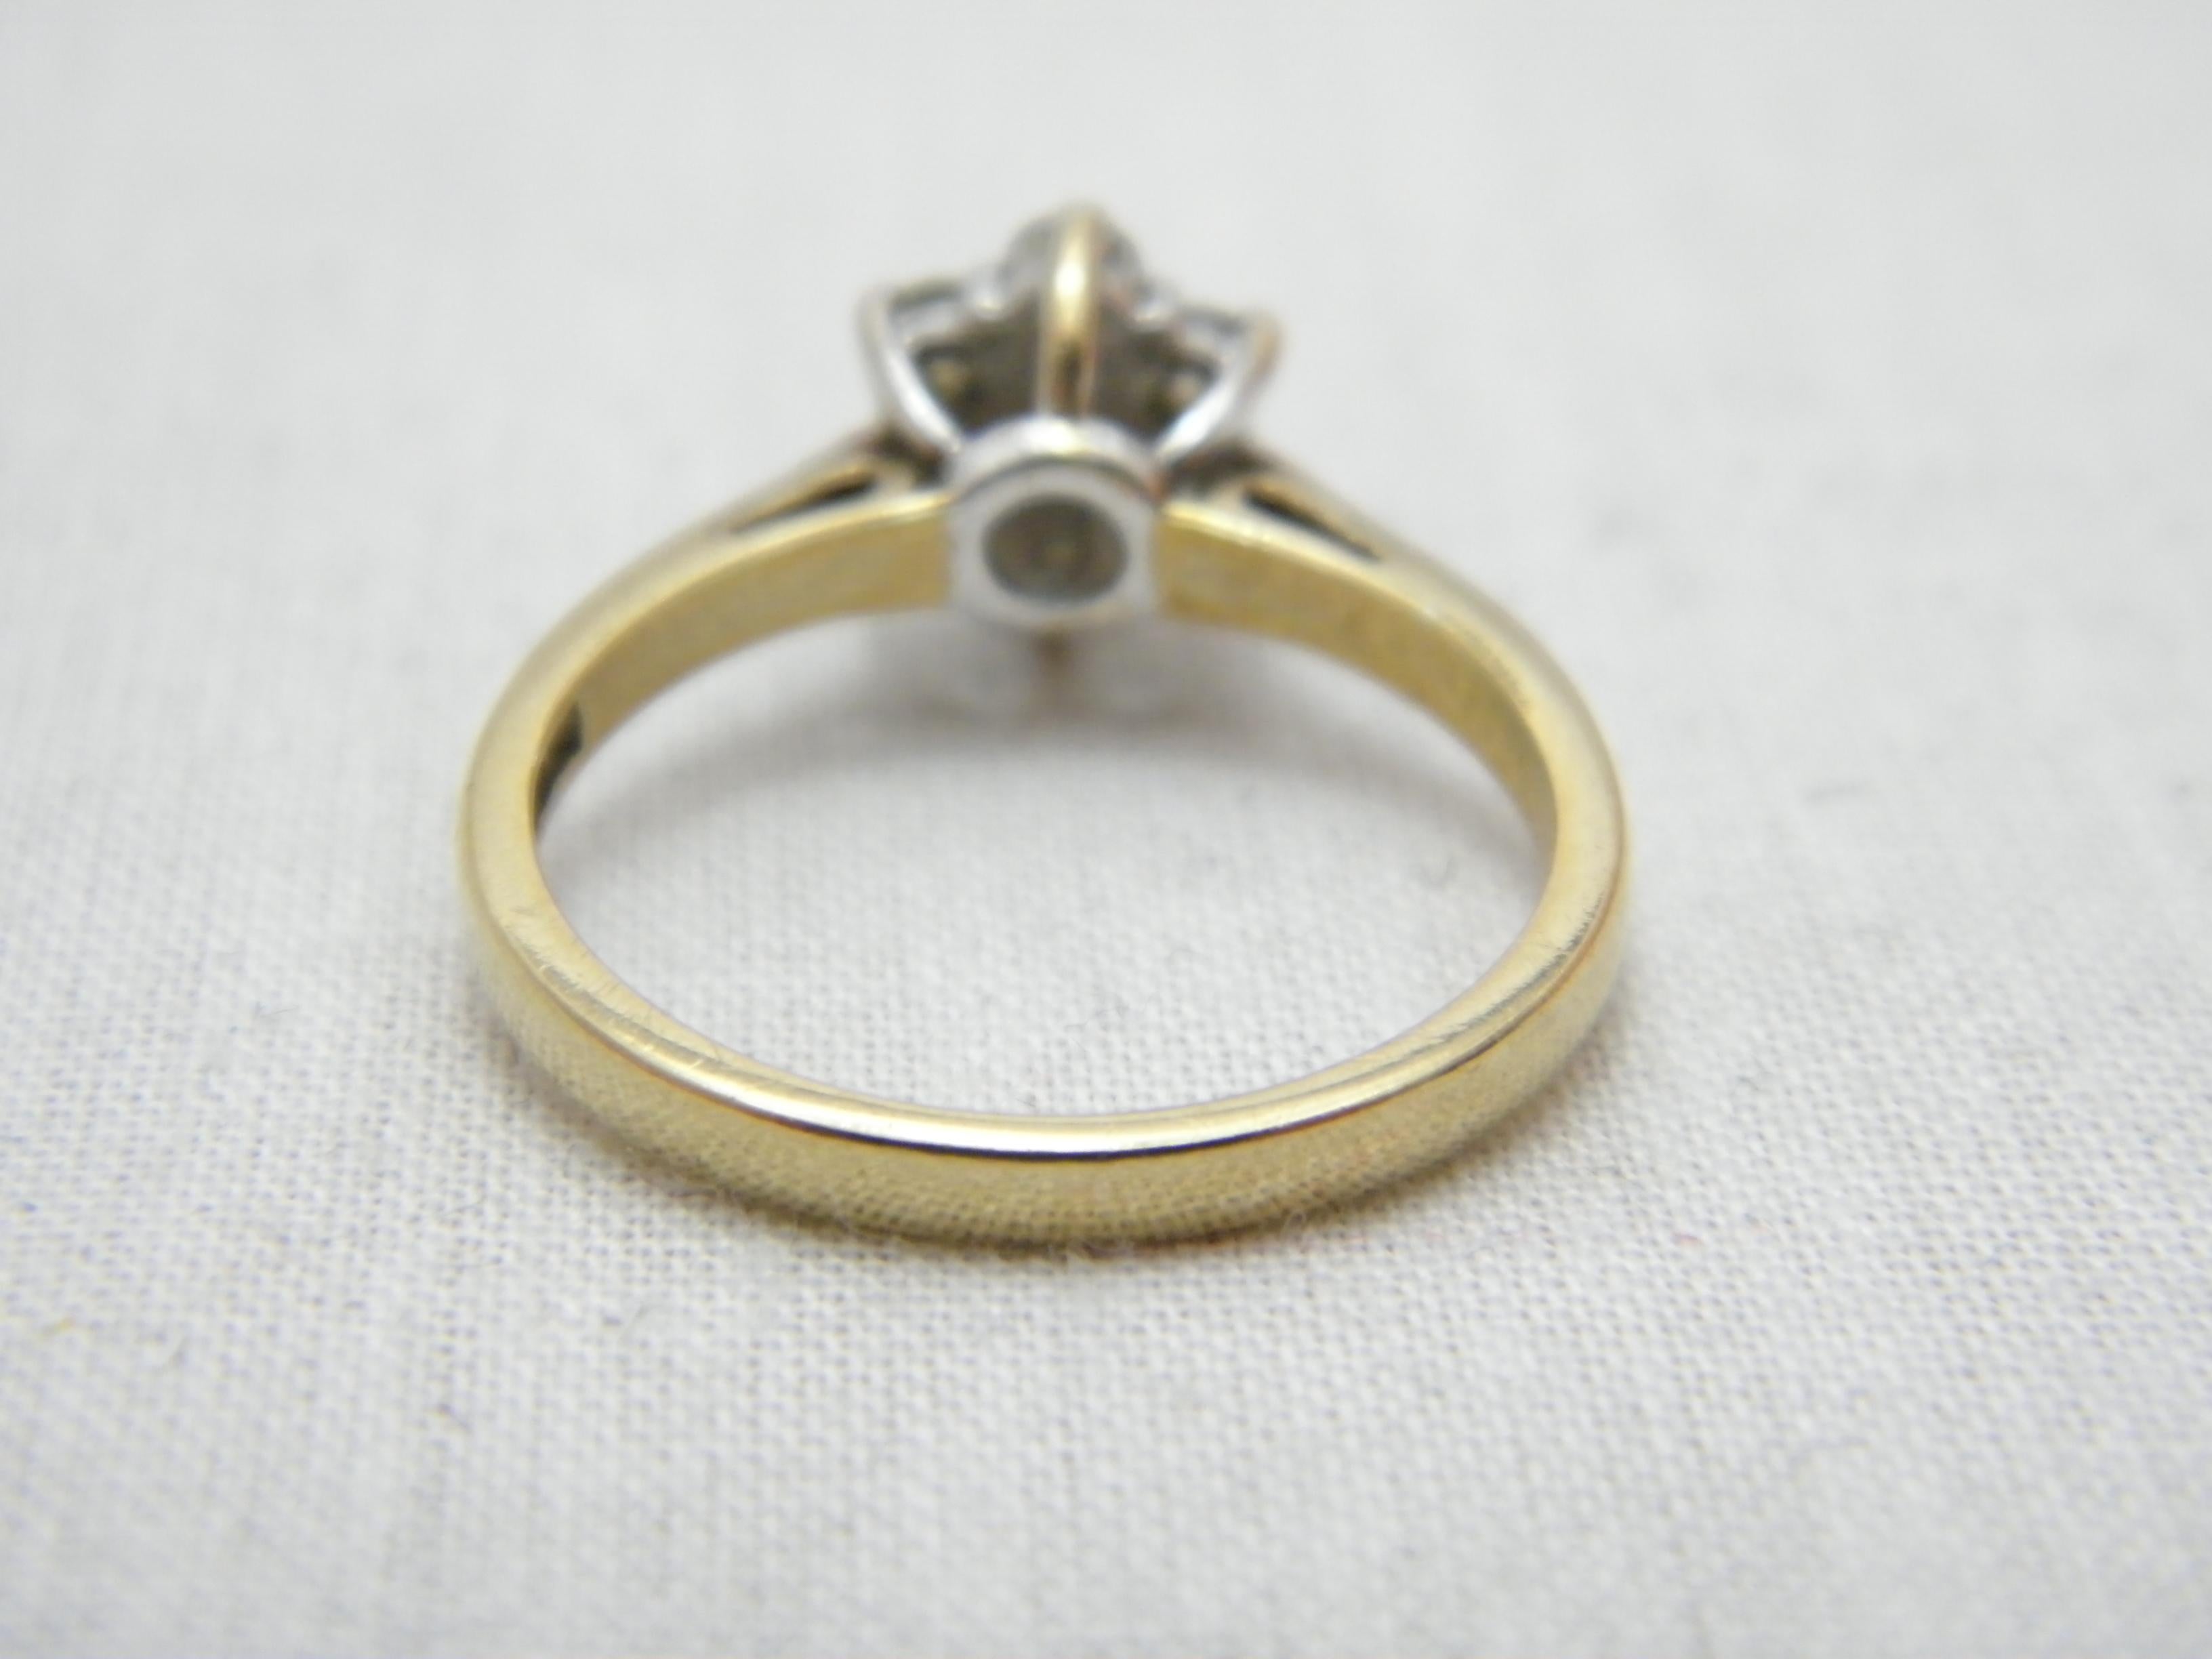 Vintage 9ct Gold 0.5Cttw Diamond Daisy Cluster Engagement Ring Size N 6.75 375 In Good Condition For Sale In Camelford, GB